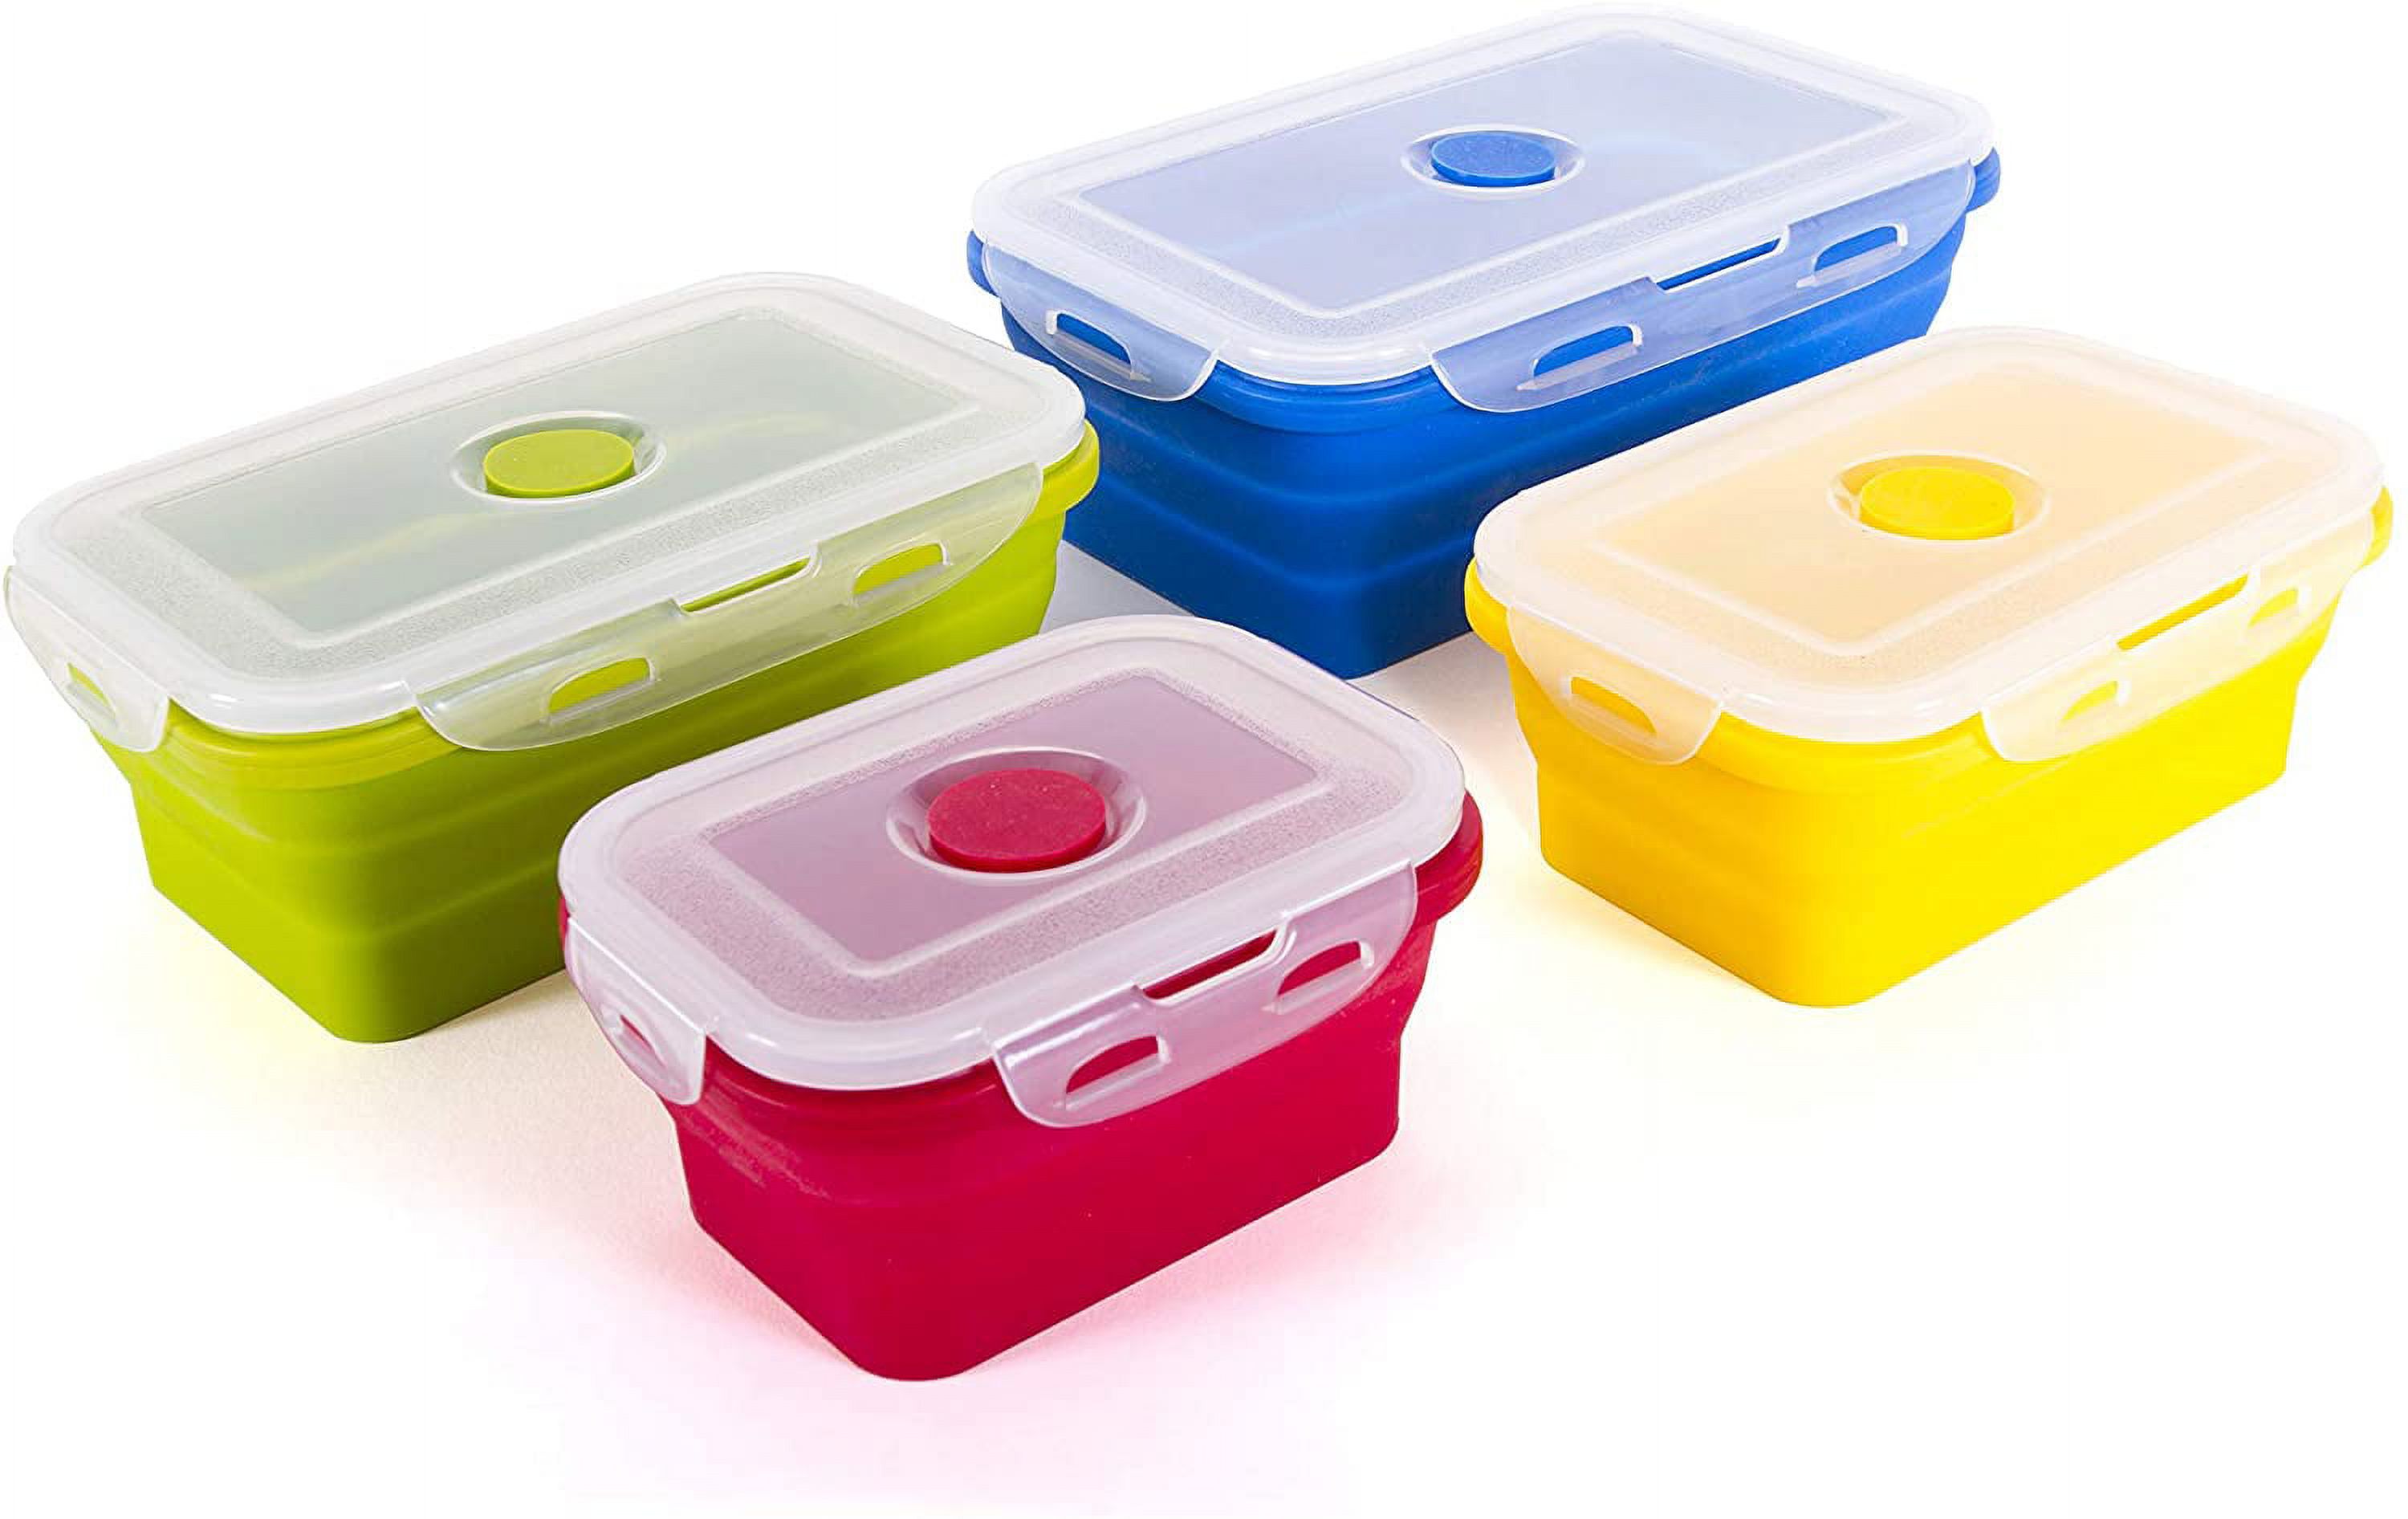 Thin Bins Collapsible Containers Set of 4 Rectangle Silicone Food Storage Containers BPA Free, Microwave, Dishwasher Safe - image 4 of 8